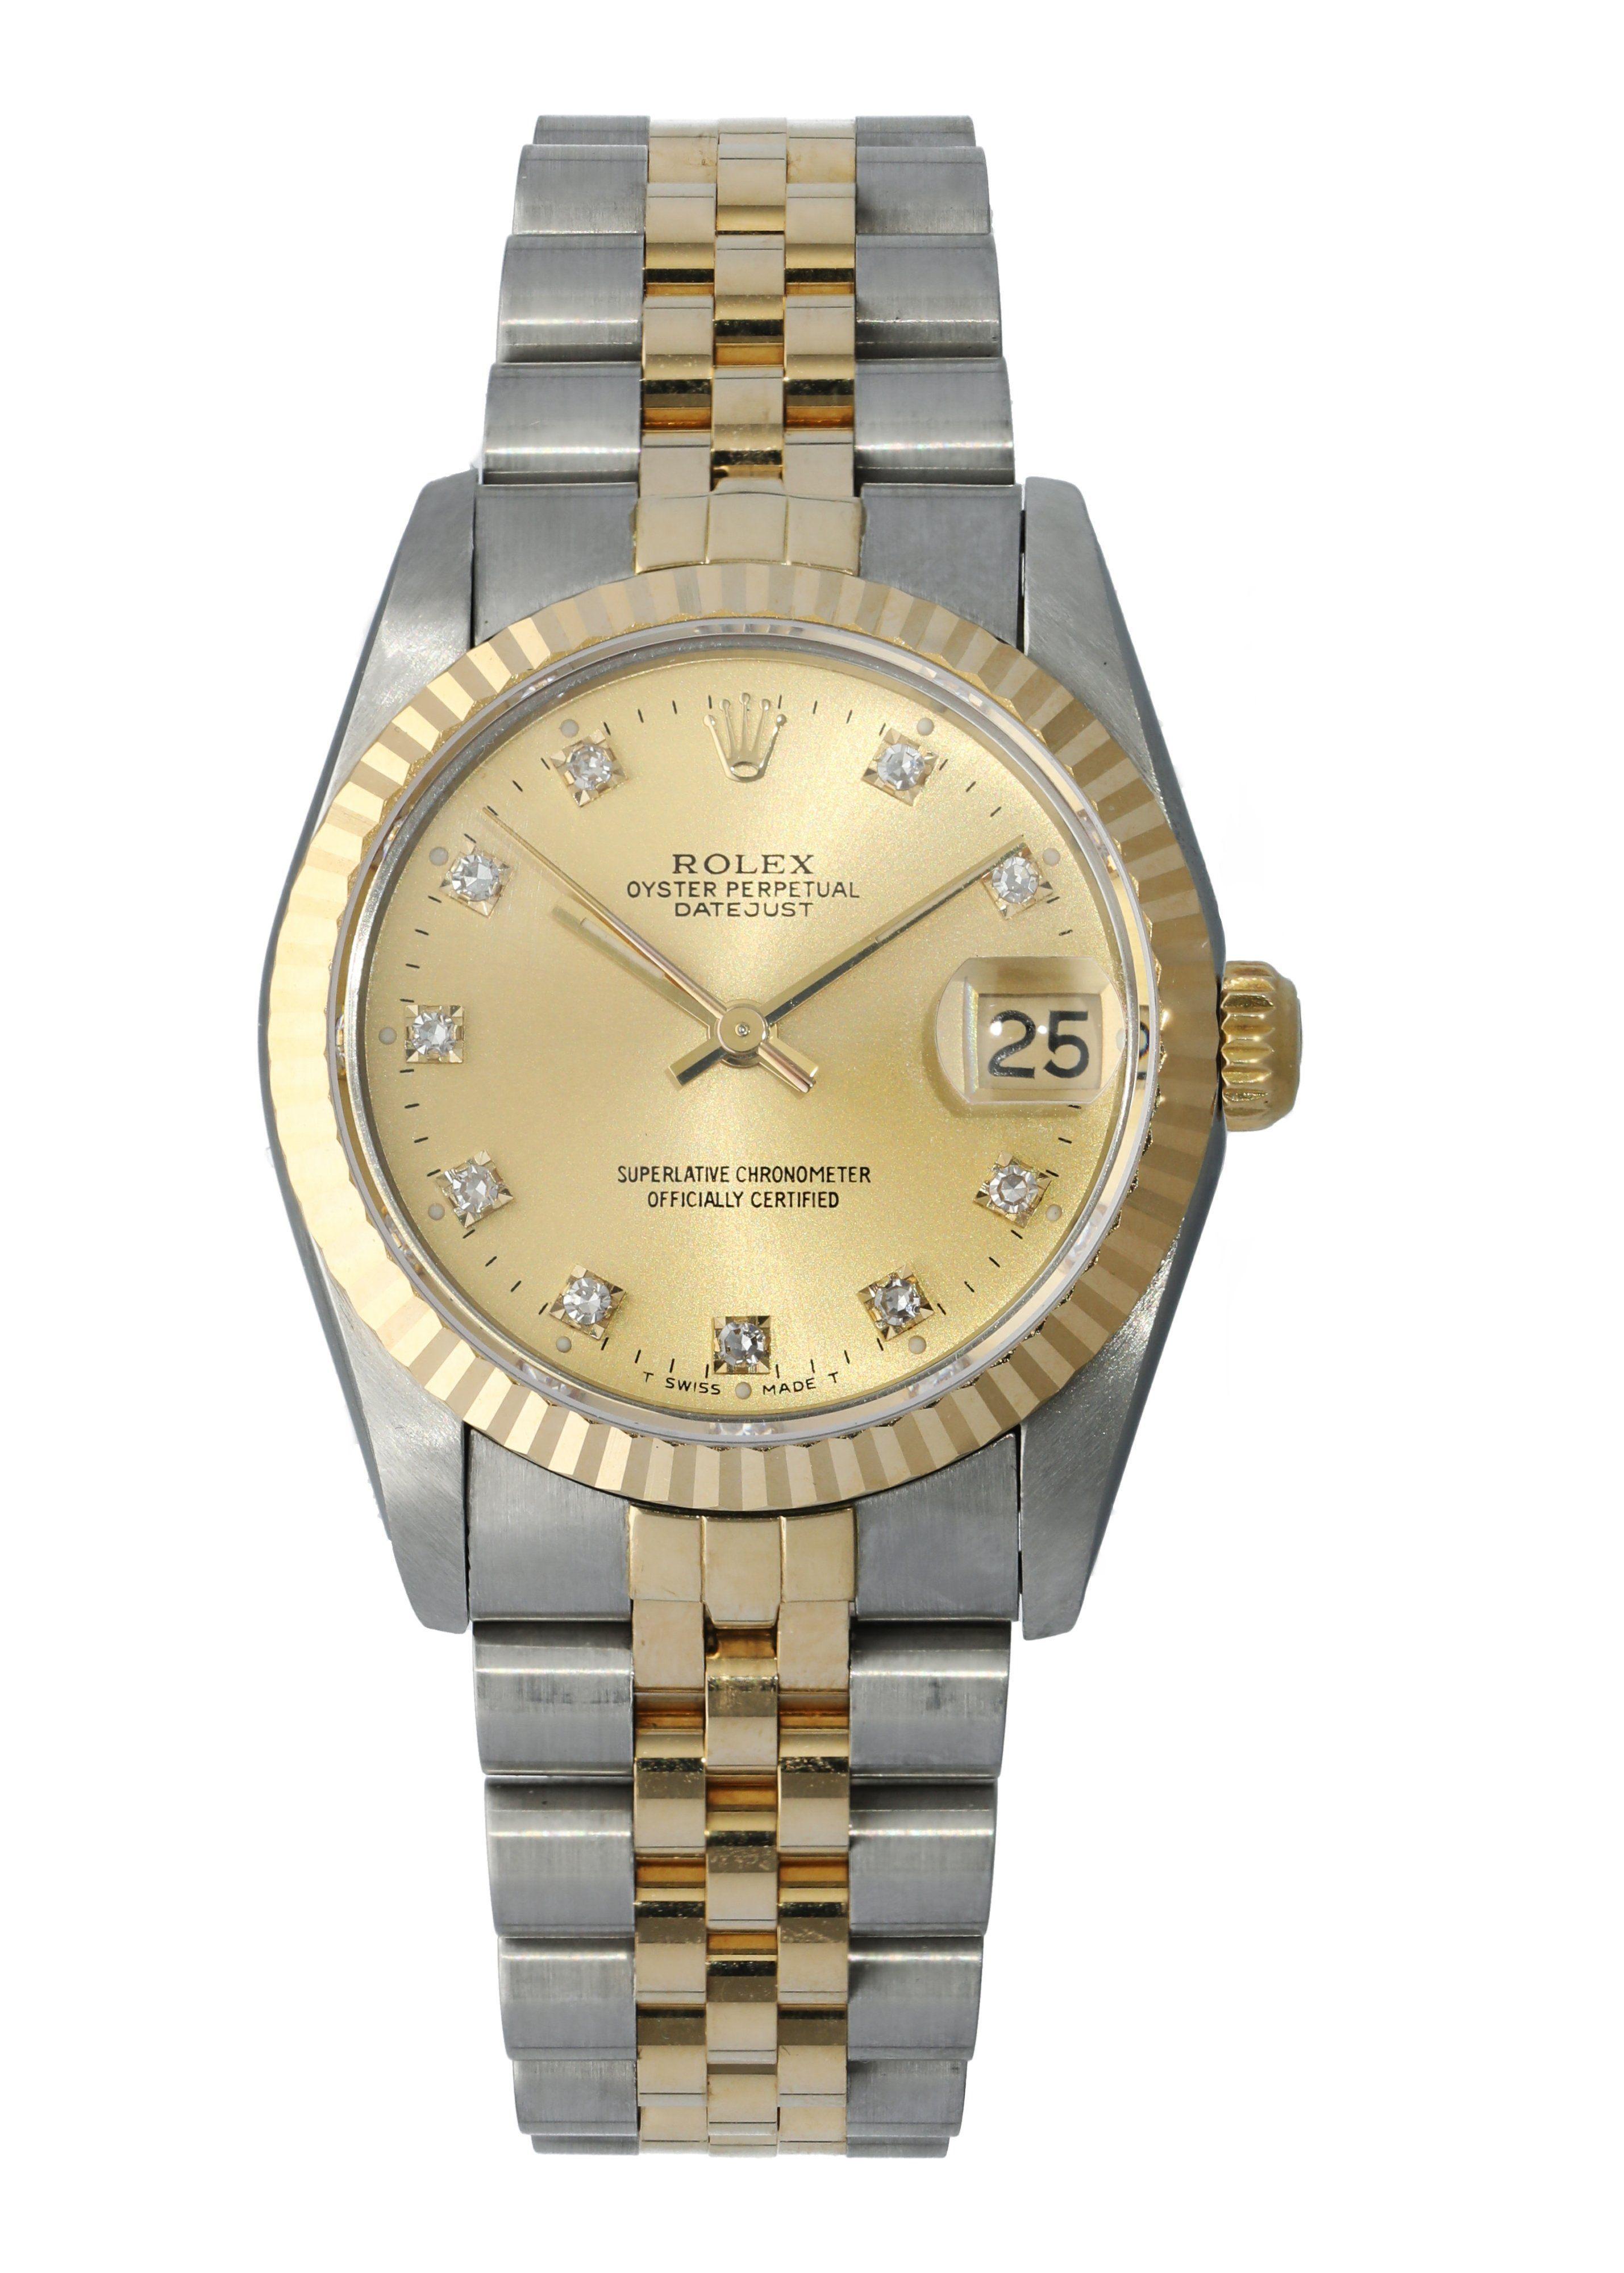 Rolex Datejust 68273 Diamond Dial Ladies Watch.
31mm Stainless Steel case.
Yellow Gold fluted bezel.
Champagne dial with luminous gold hands and factory set diamond hour markers.
Minute markers on the outer dial.
Date display at the 3 o'clock